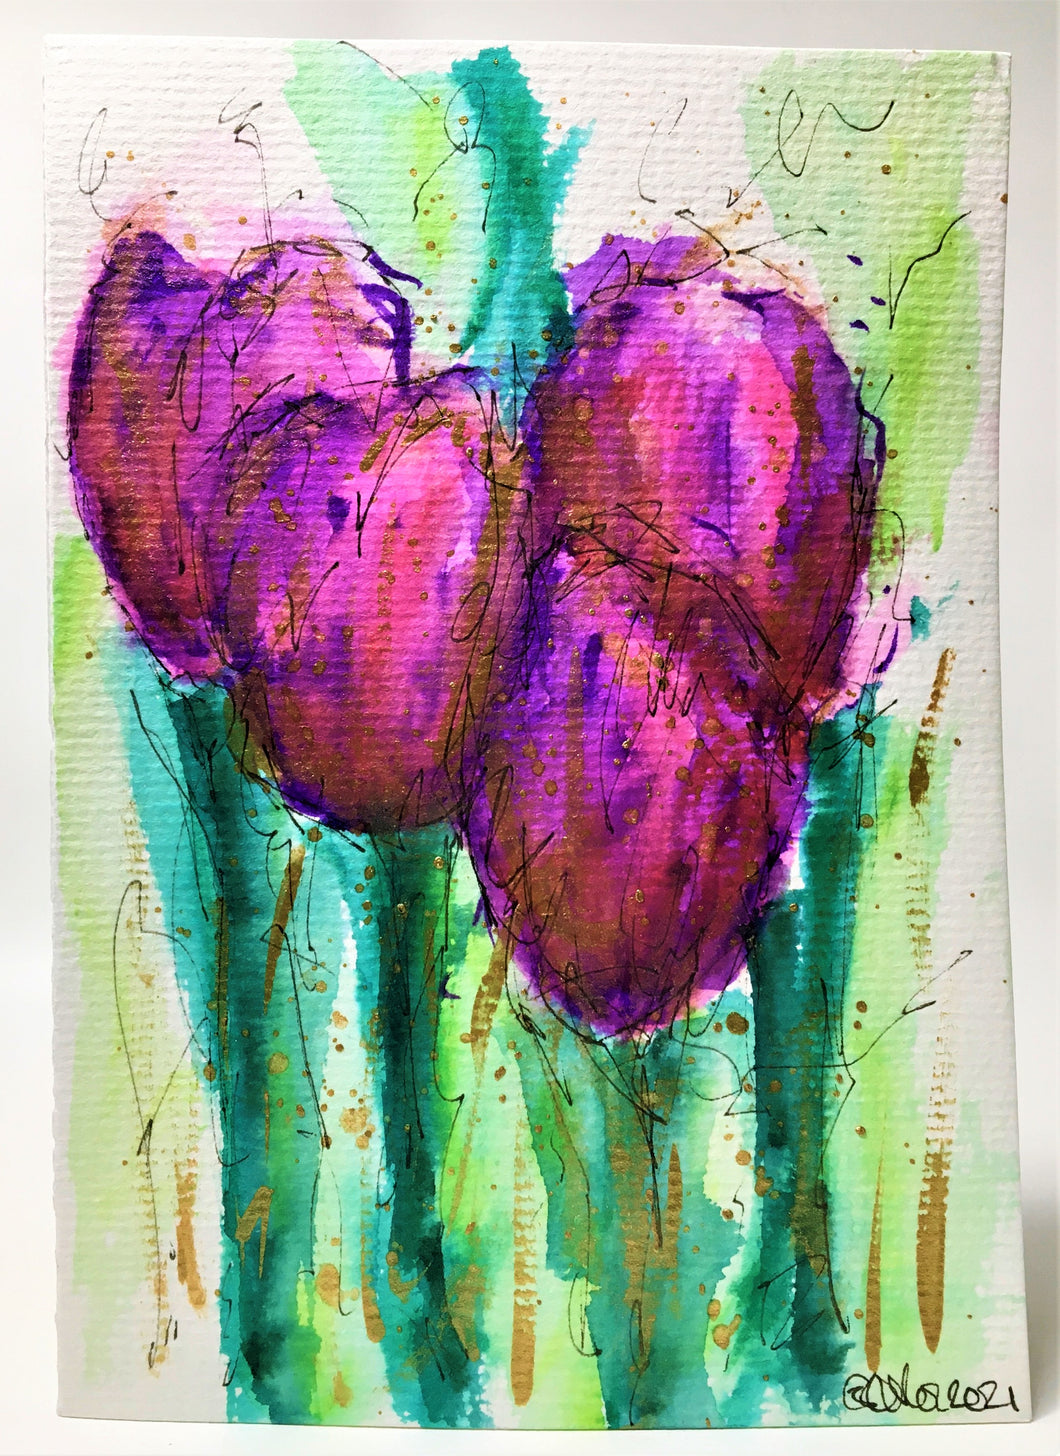 Original Hand Painted Greeting Card - 3 Purple, Pink and Gold Tulips - eDgE dEsiGn London